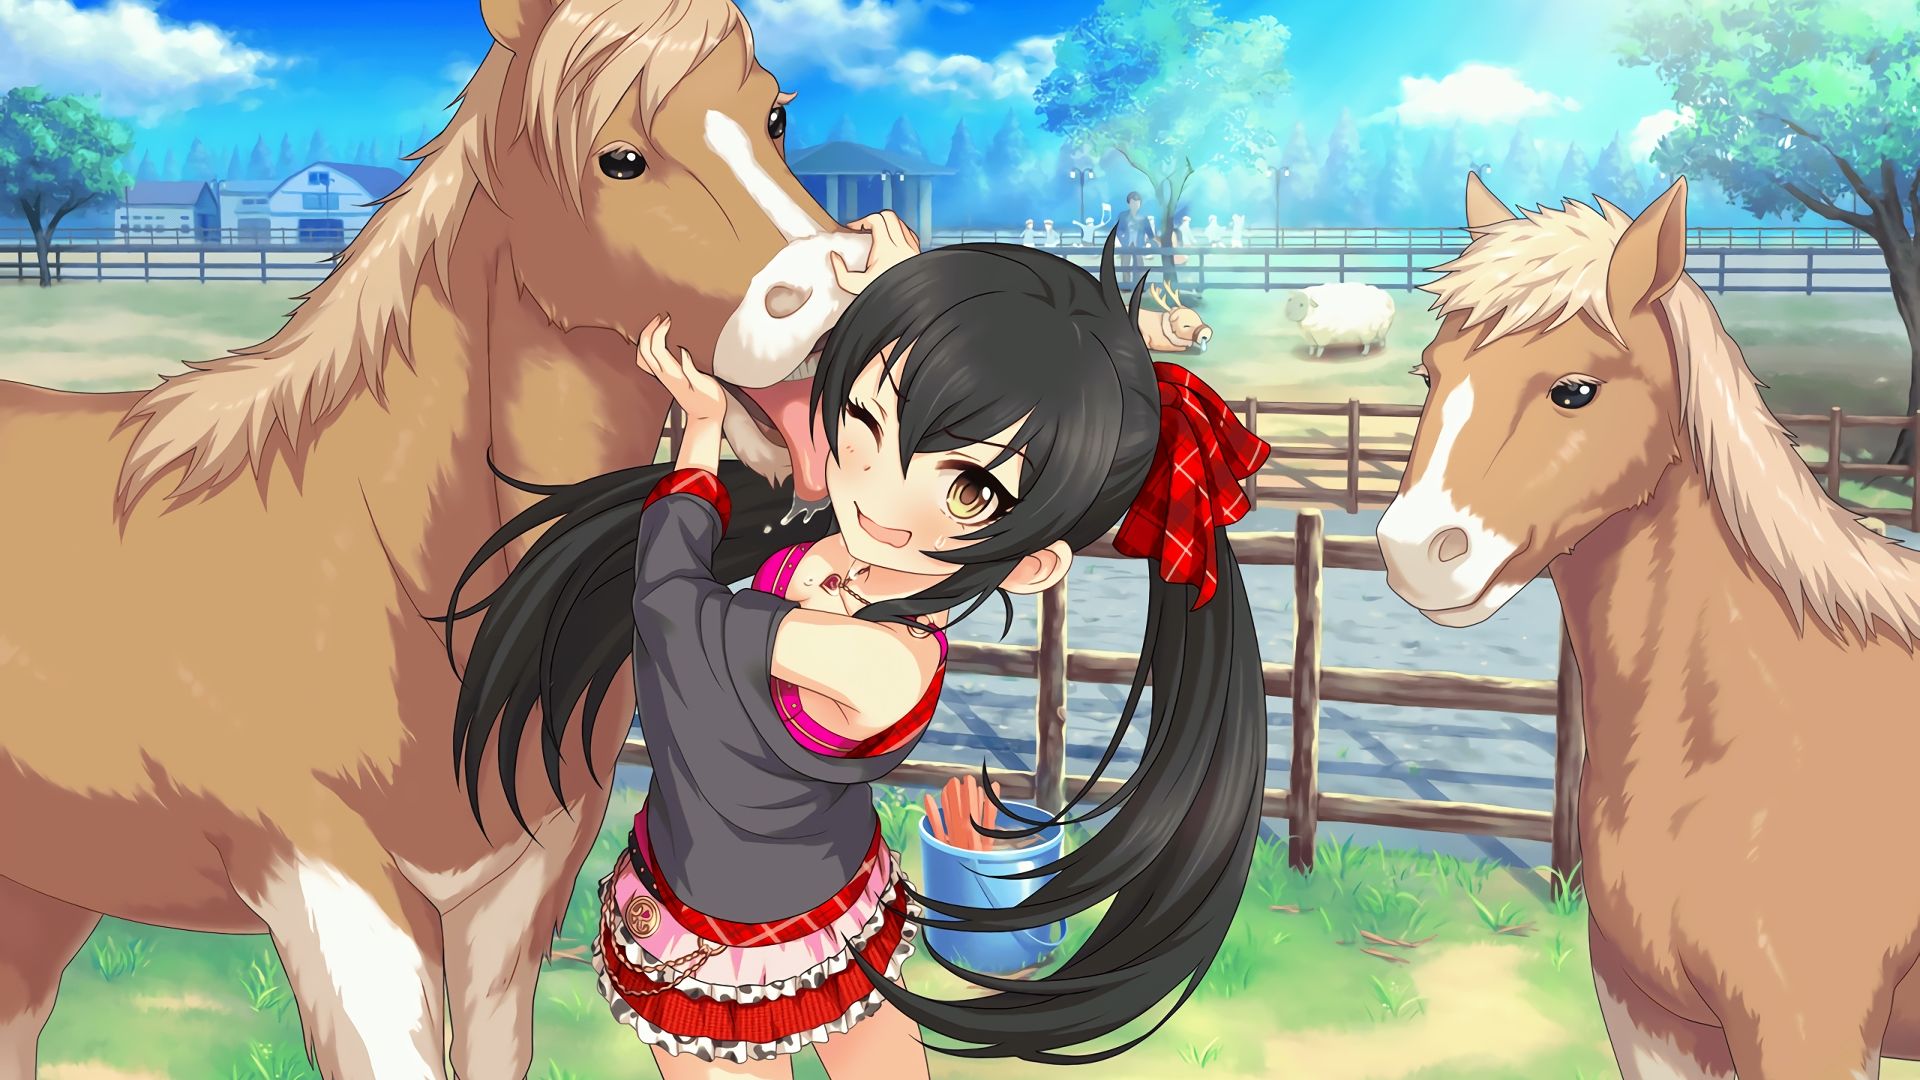 Confessions of an Animangaholic — “I'd kill for an anime about horse riding .”